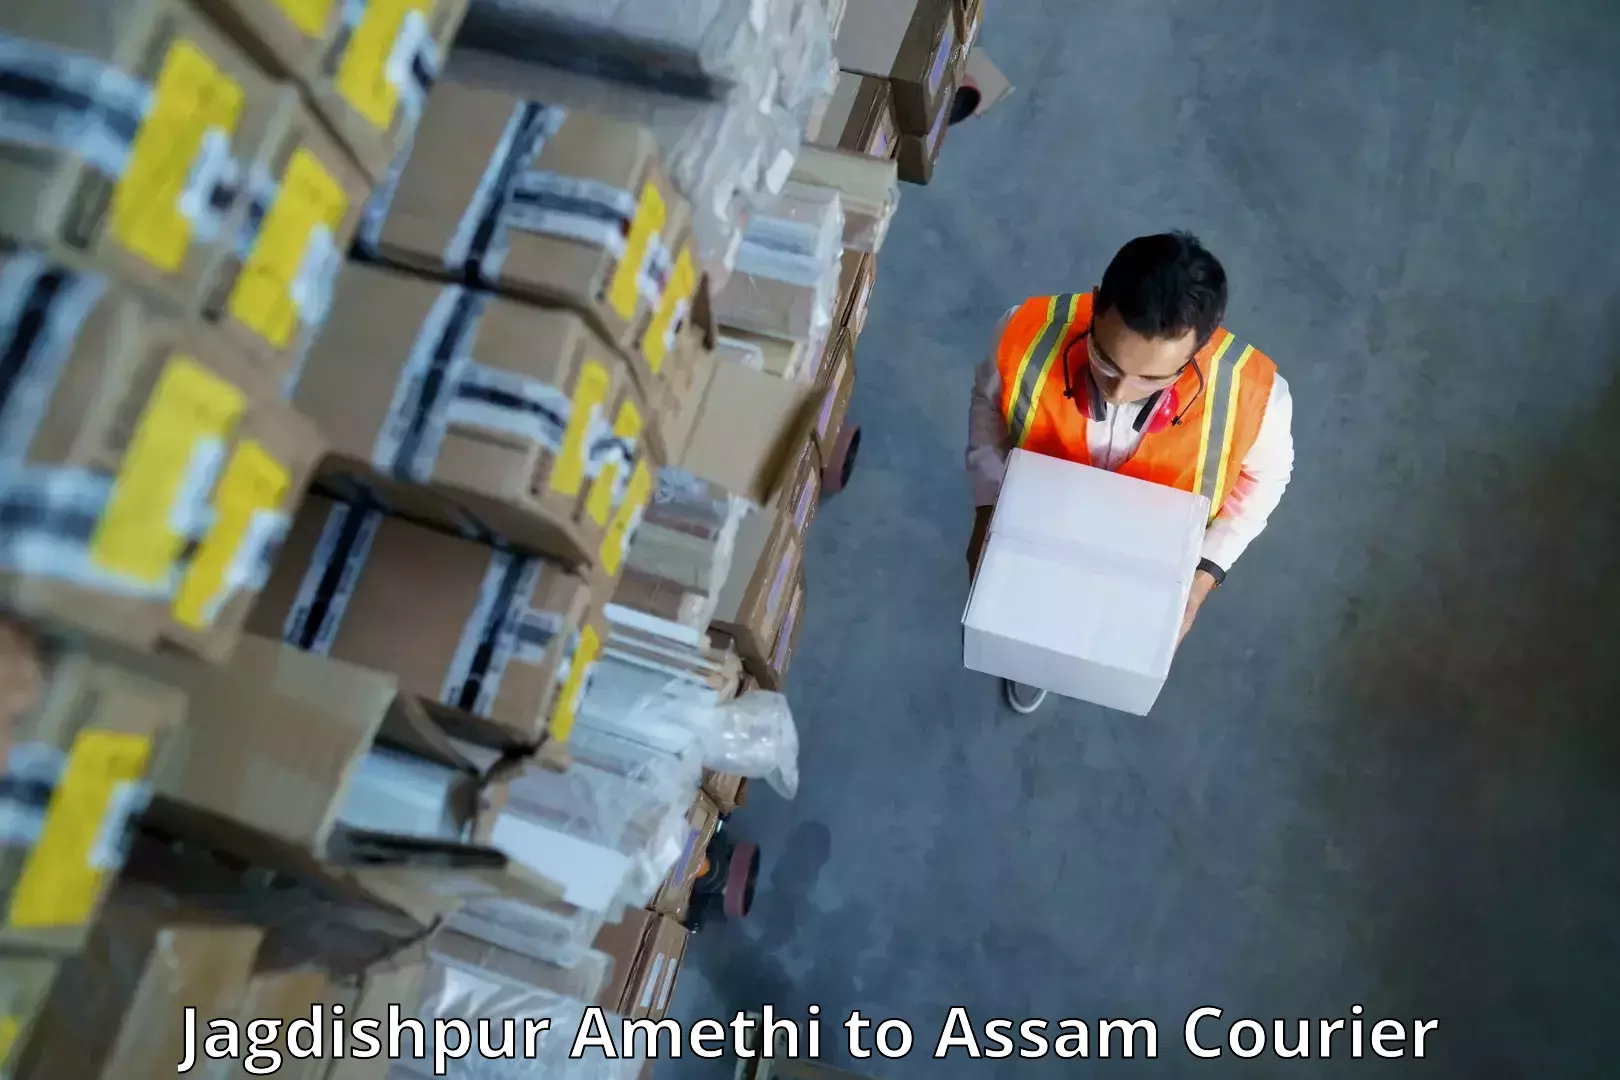 Easy access courier services Jagdishpur Amethi to Assam